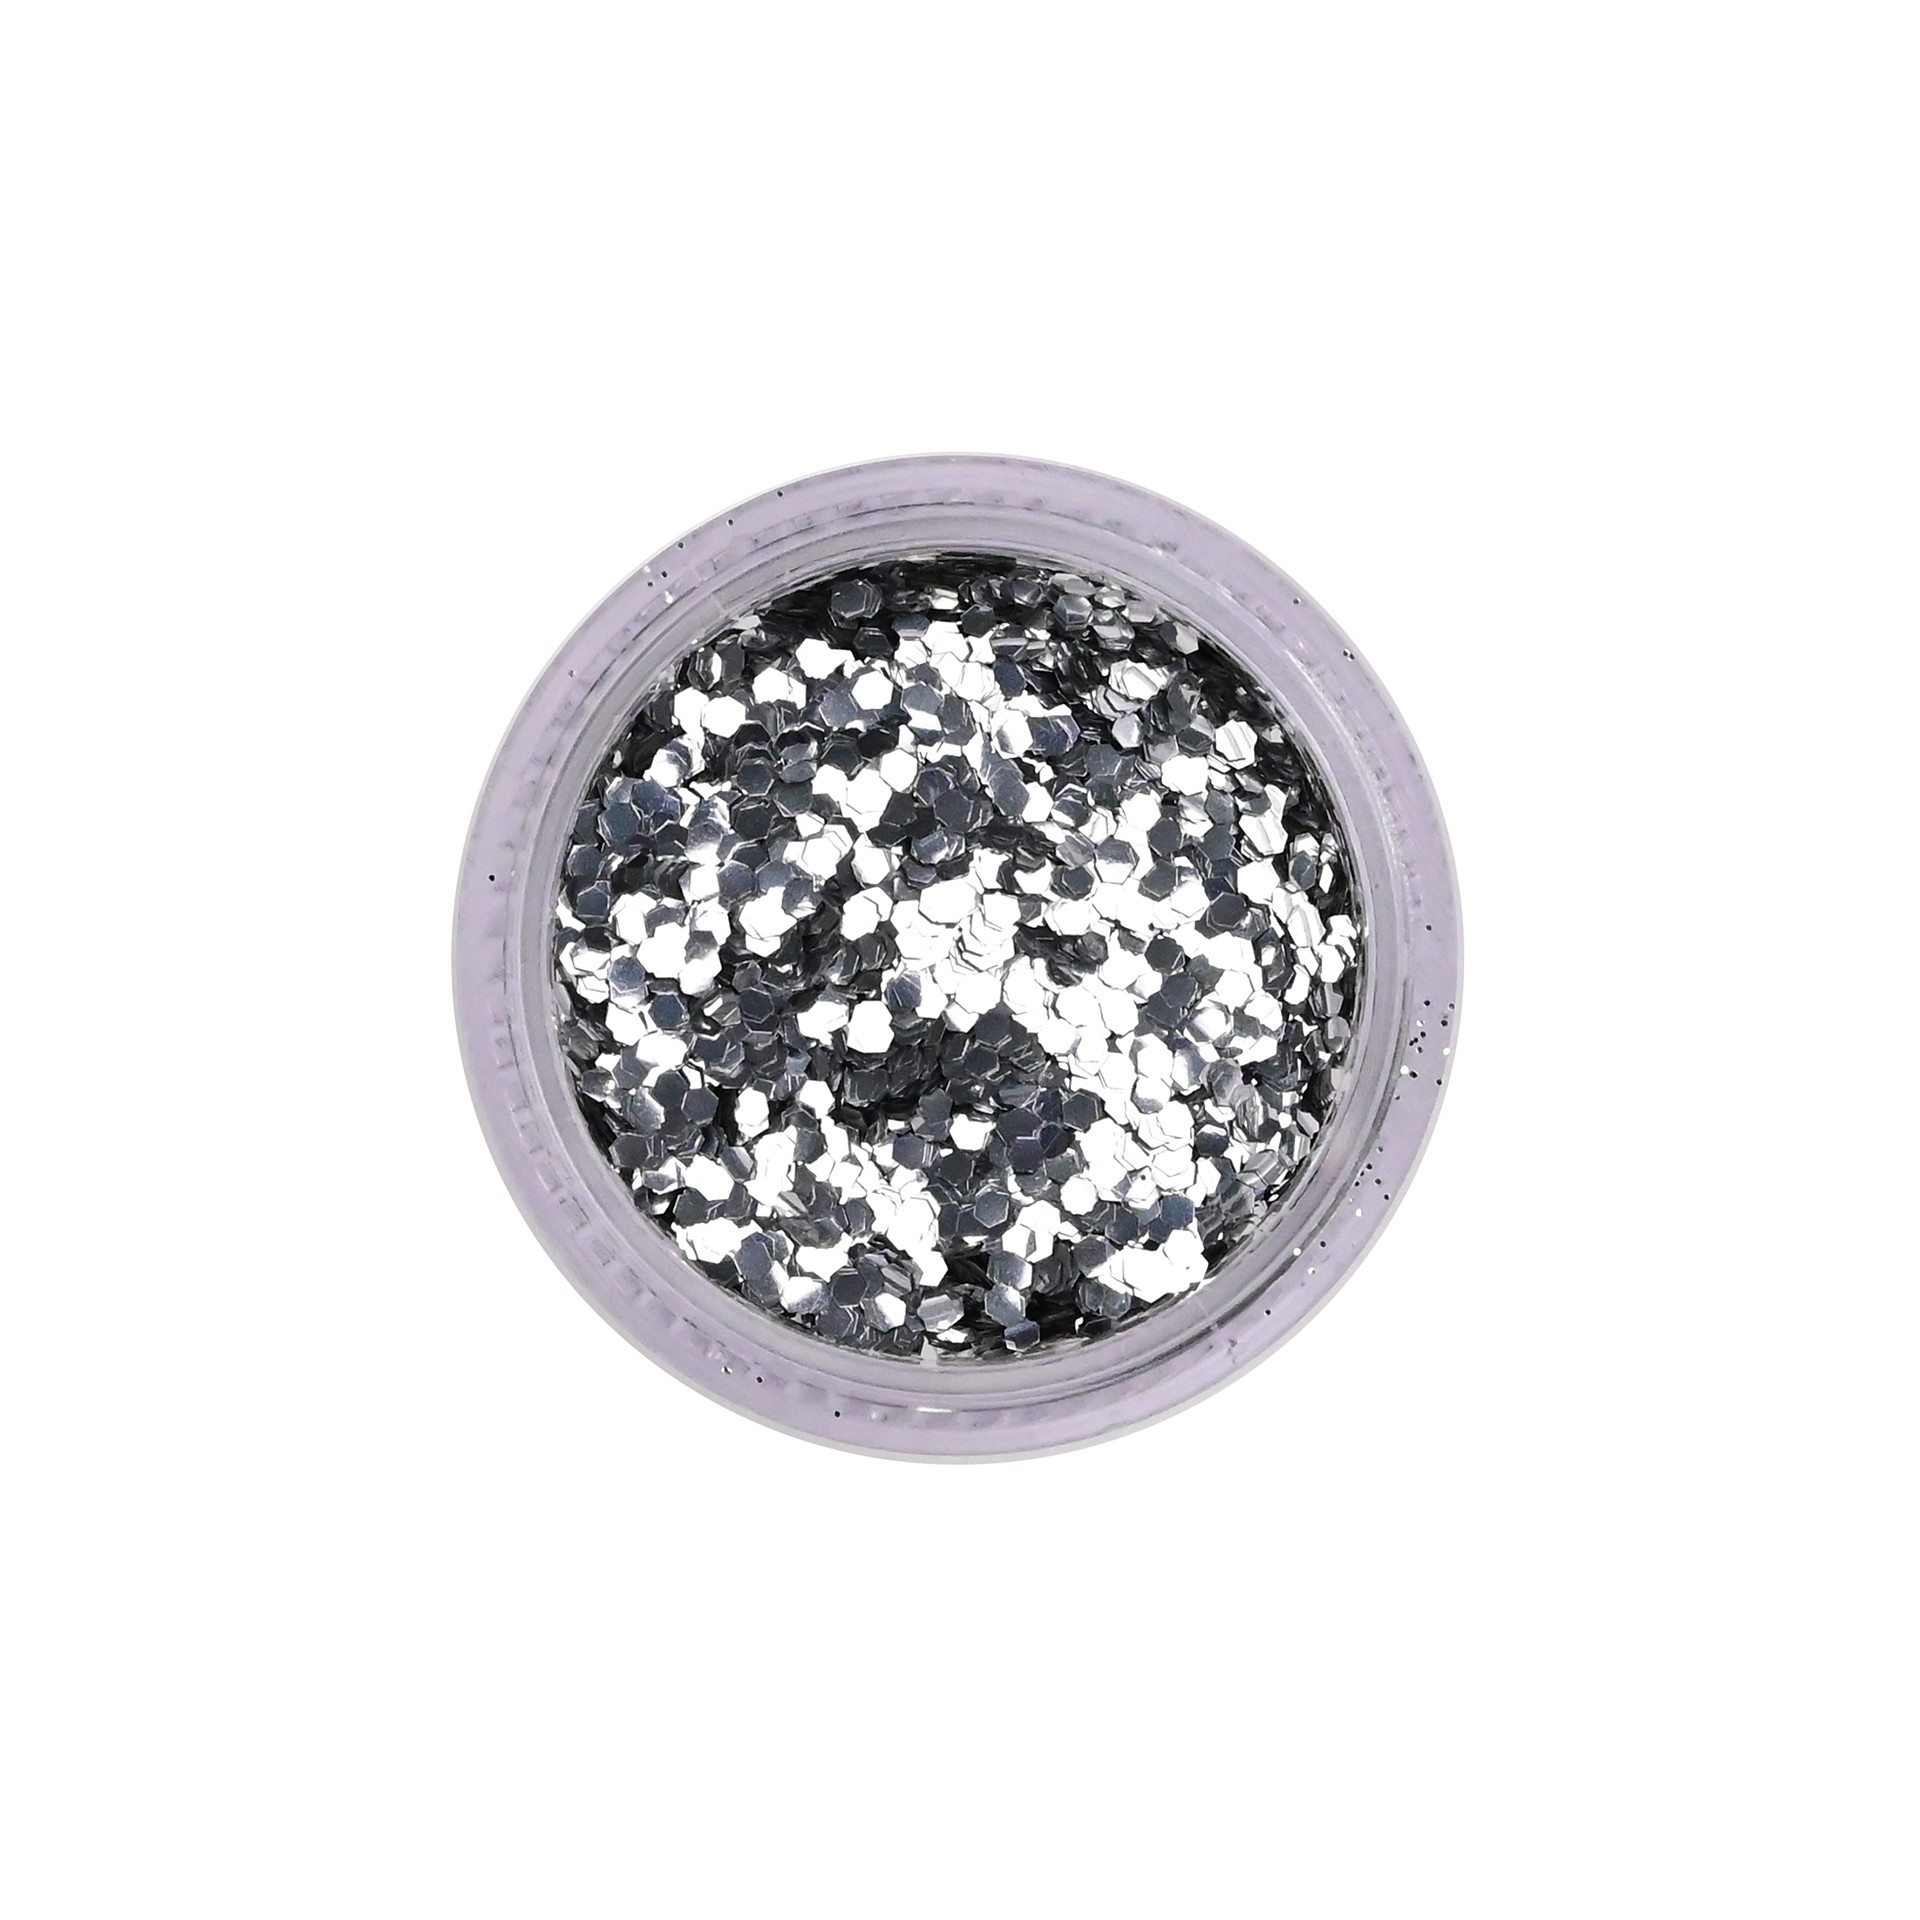 Large Silver Glitter Biodegradable for nails, face and body